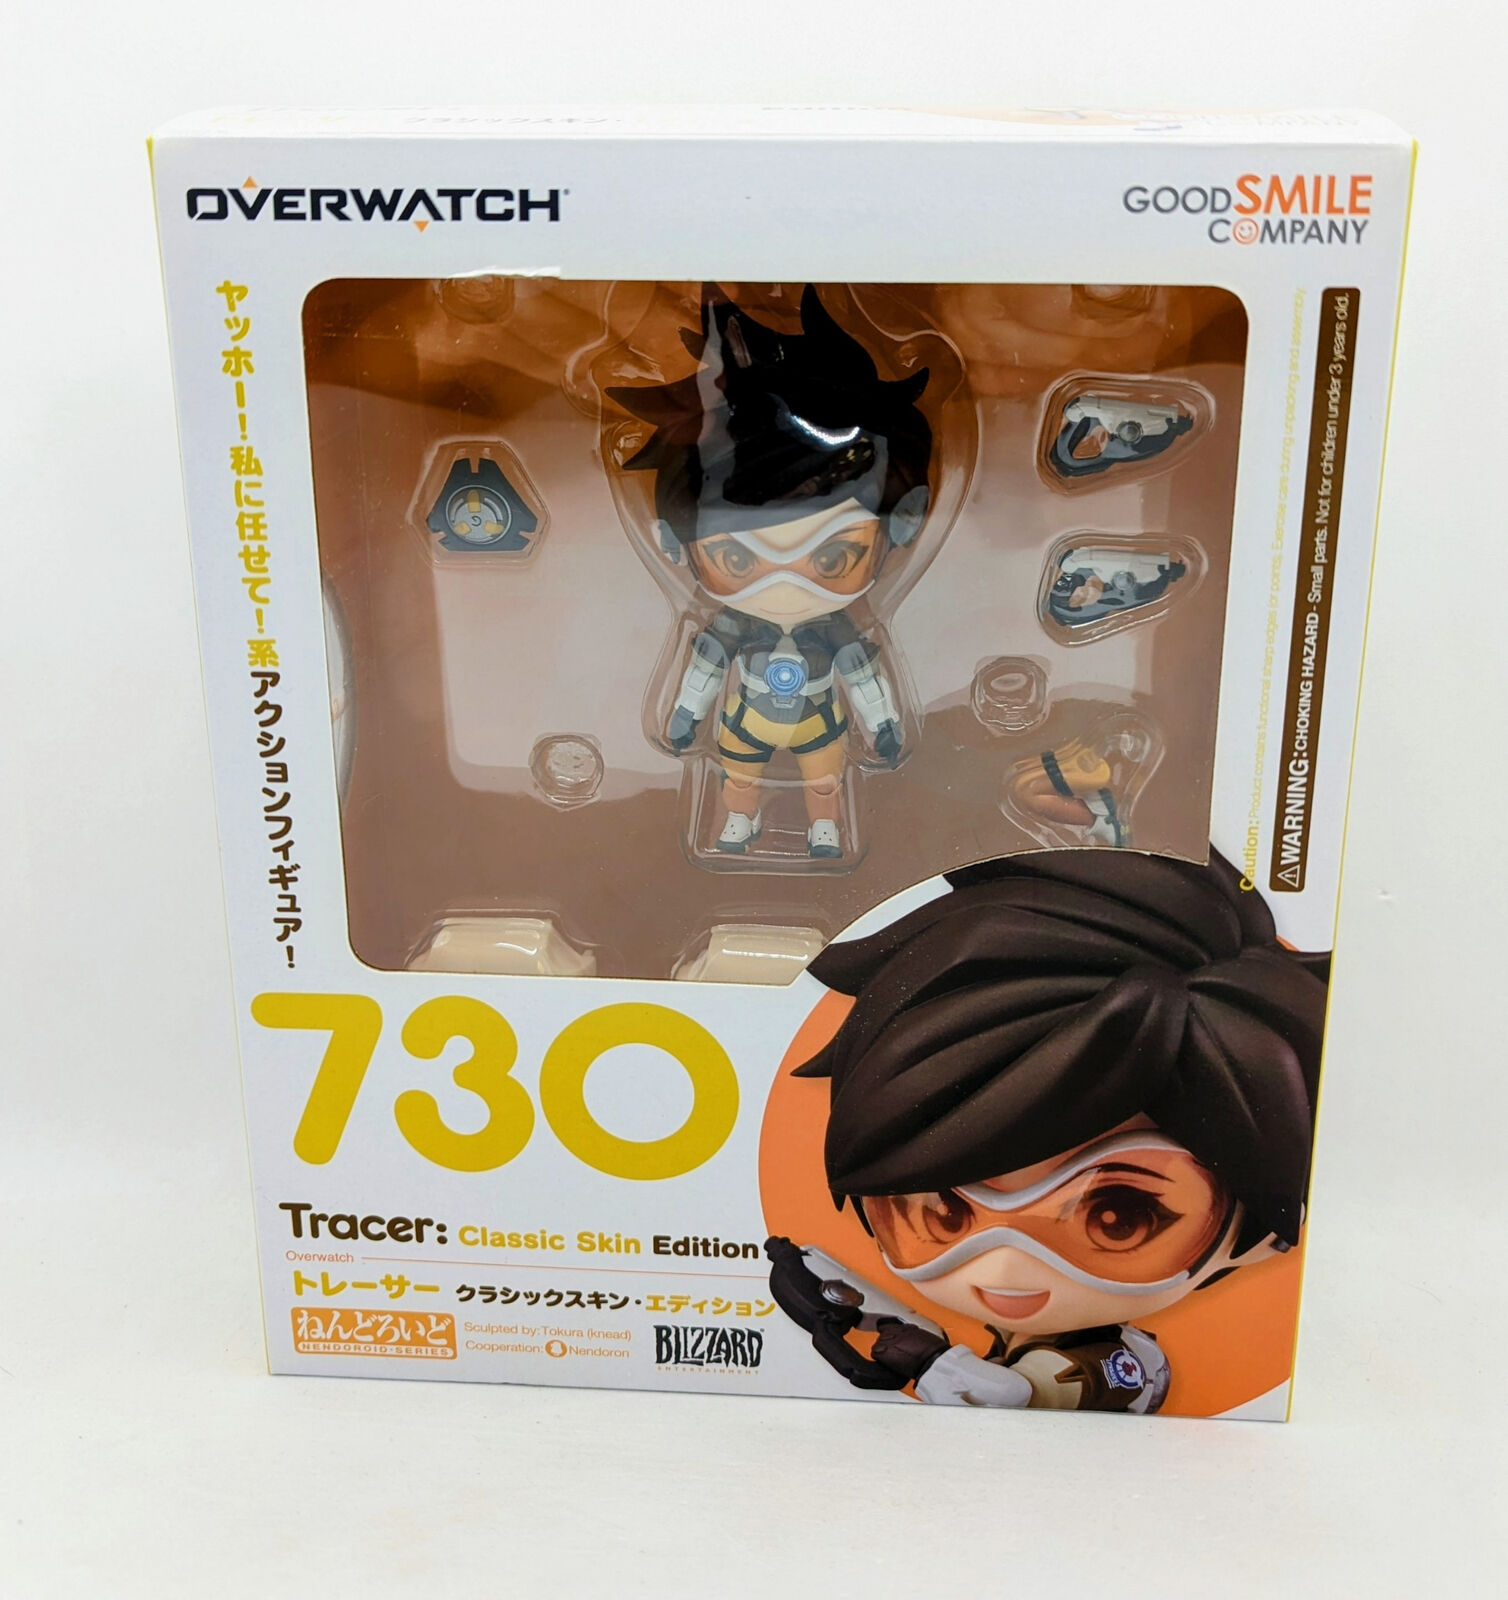 Good Smile Company Nendoroid: Overwatch Tracer Classic Skin Edition #730